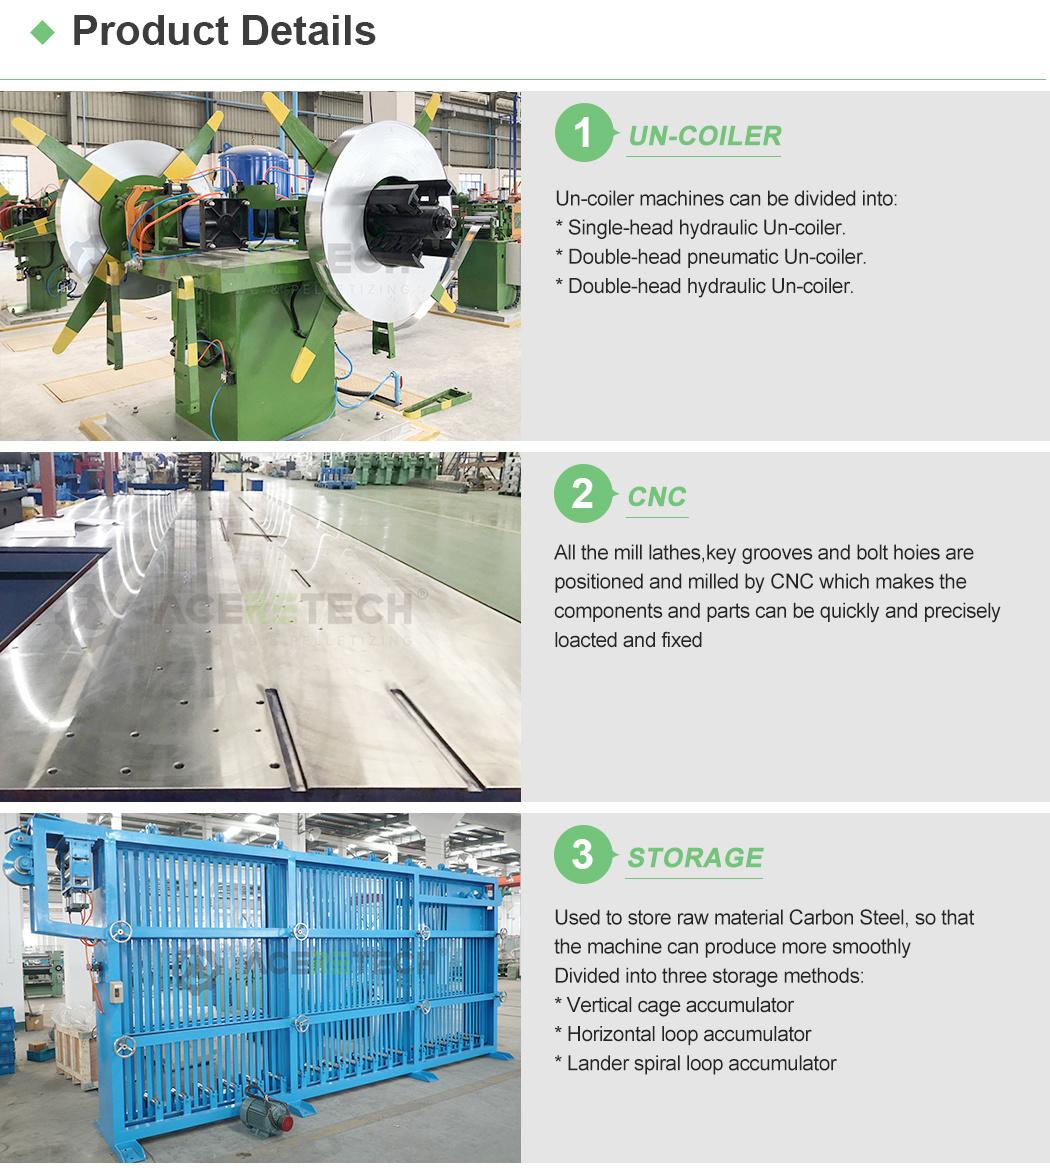 Free Accessories Steel Pipe Production Line